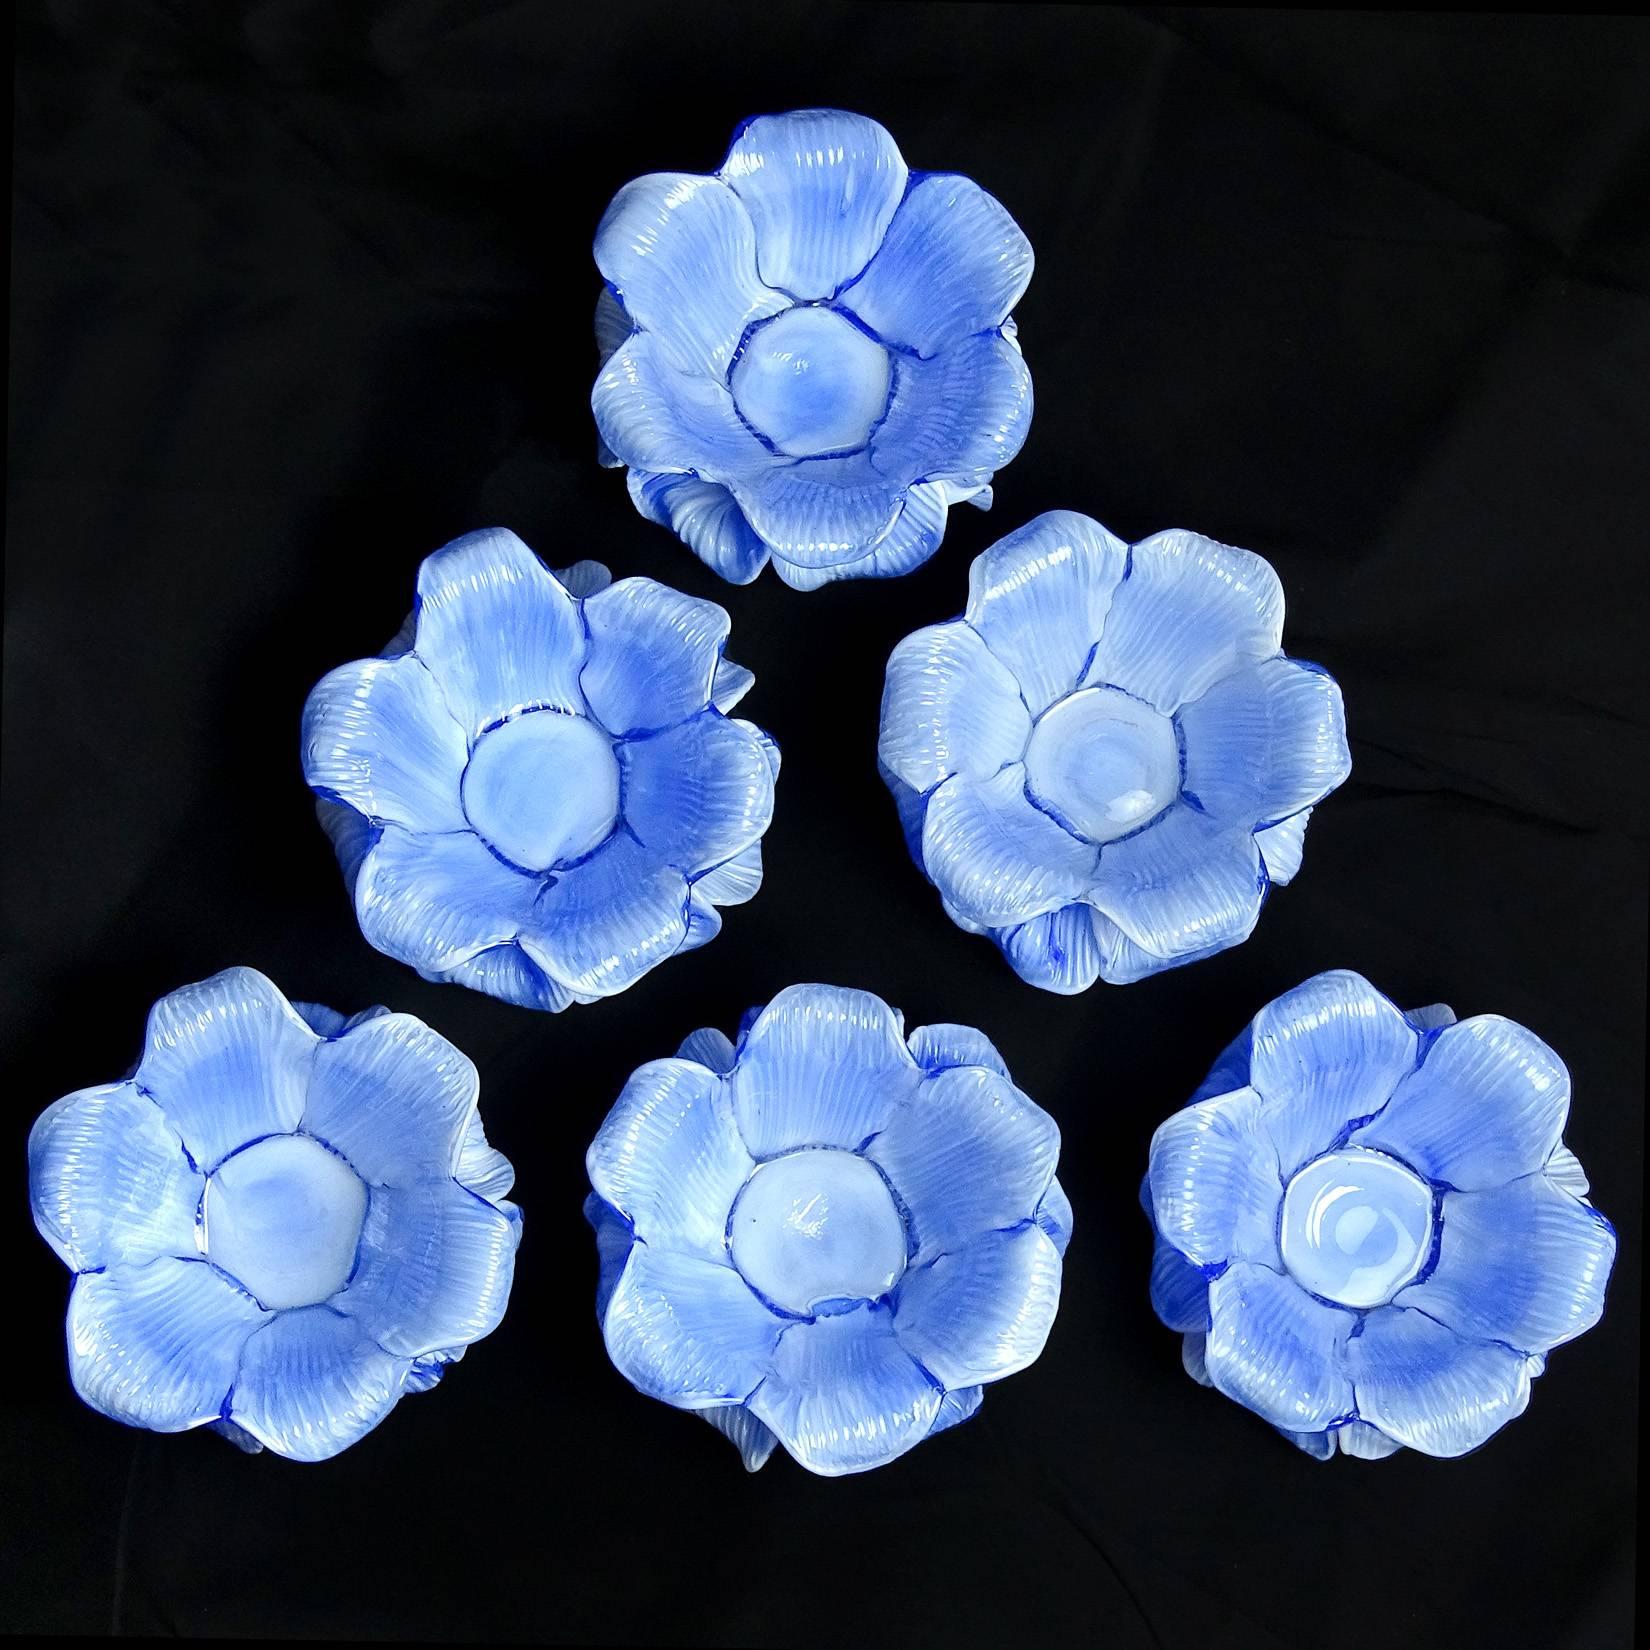 Gorgeous set of Murano handblown, blue and white double petal Italian art glass flower bowls / candleholders. Attributed to the Fratelli Toso Company, circa 1950s, all with original labels underneath. They have a glass disk on the bottom, and